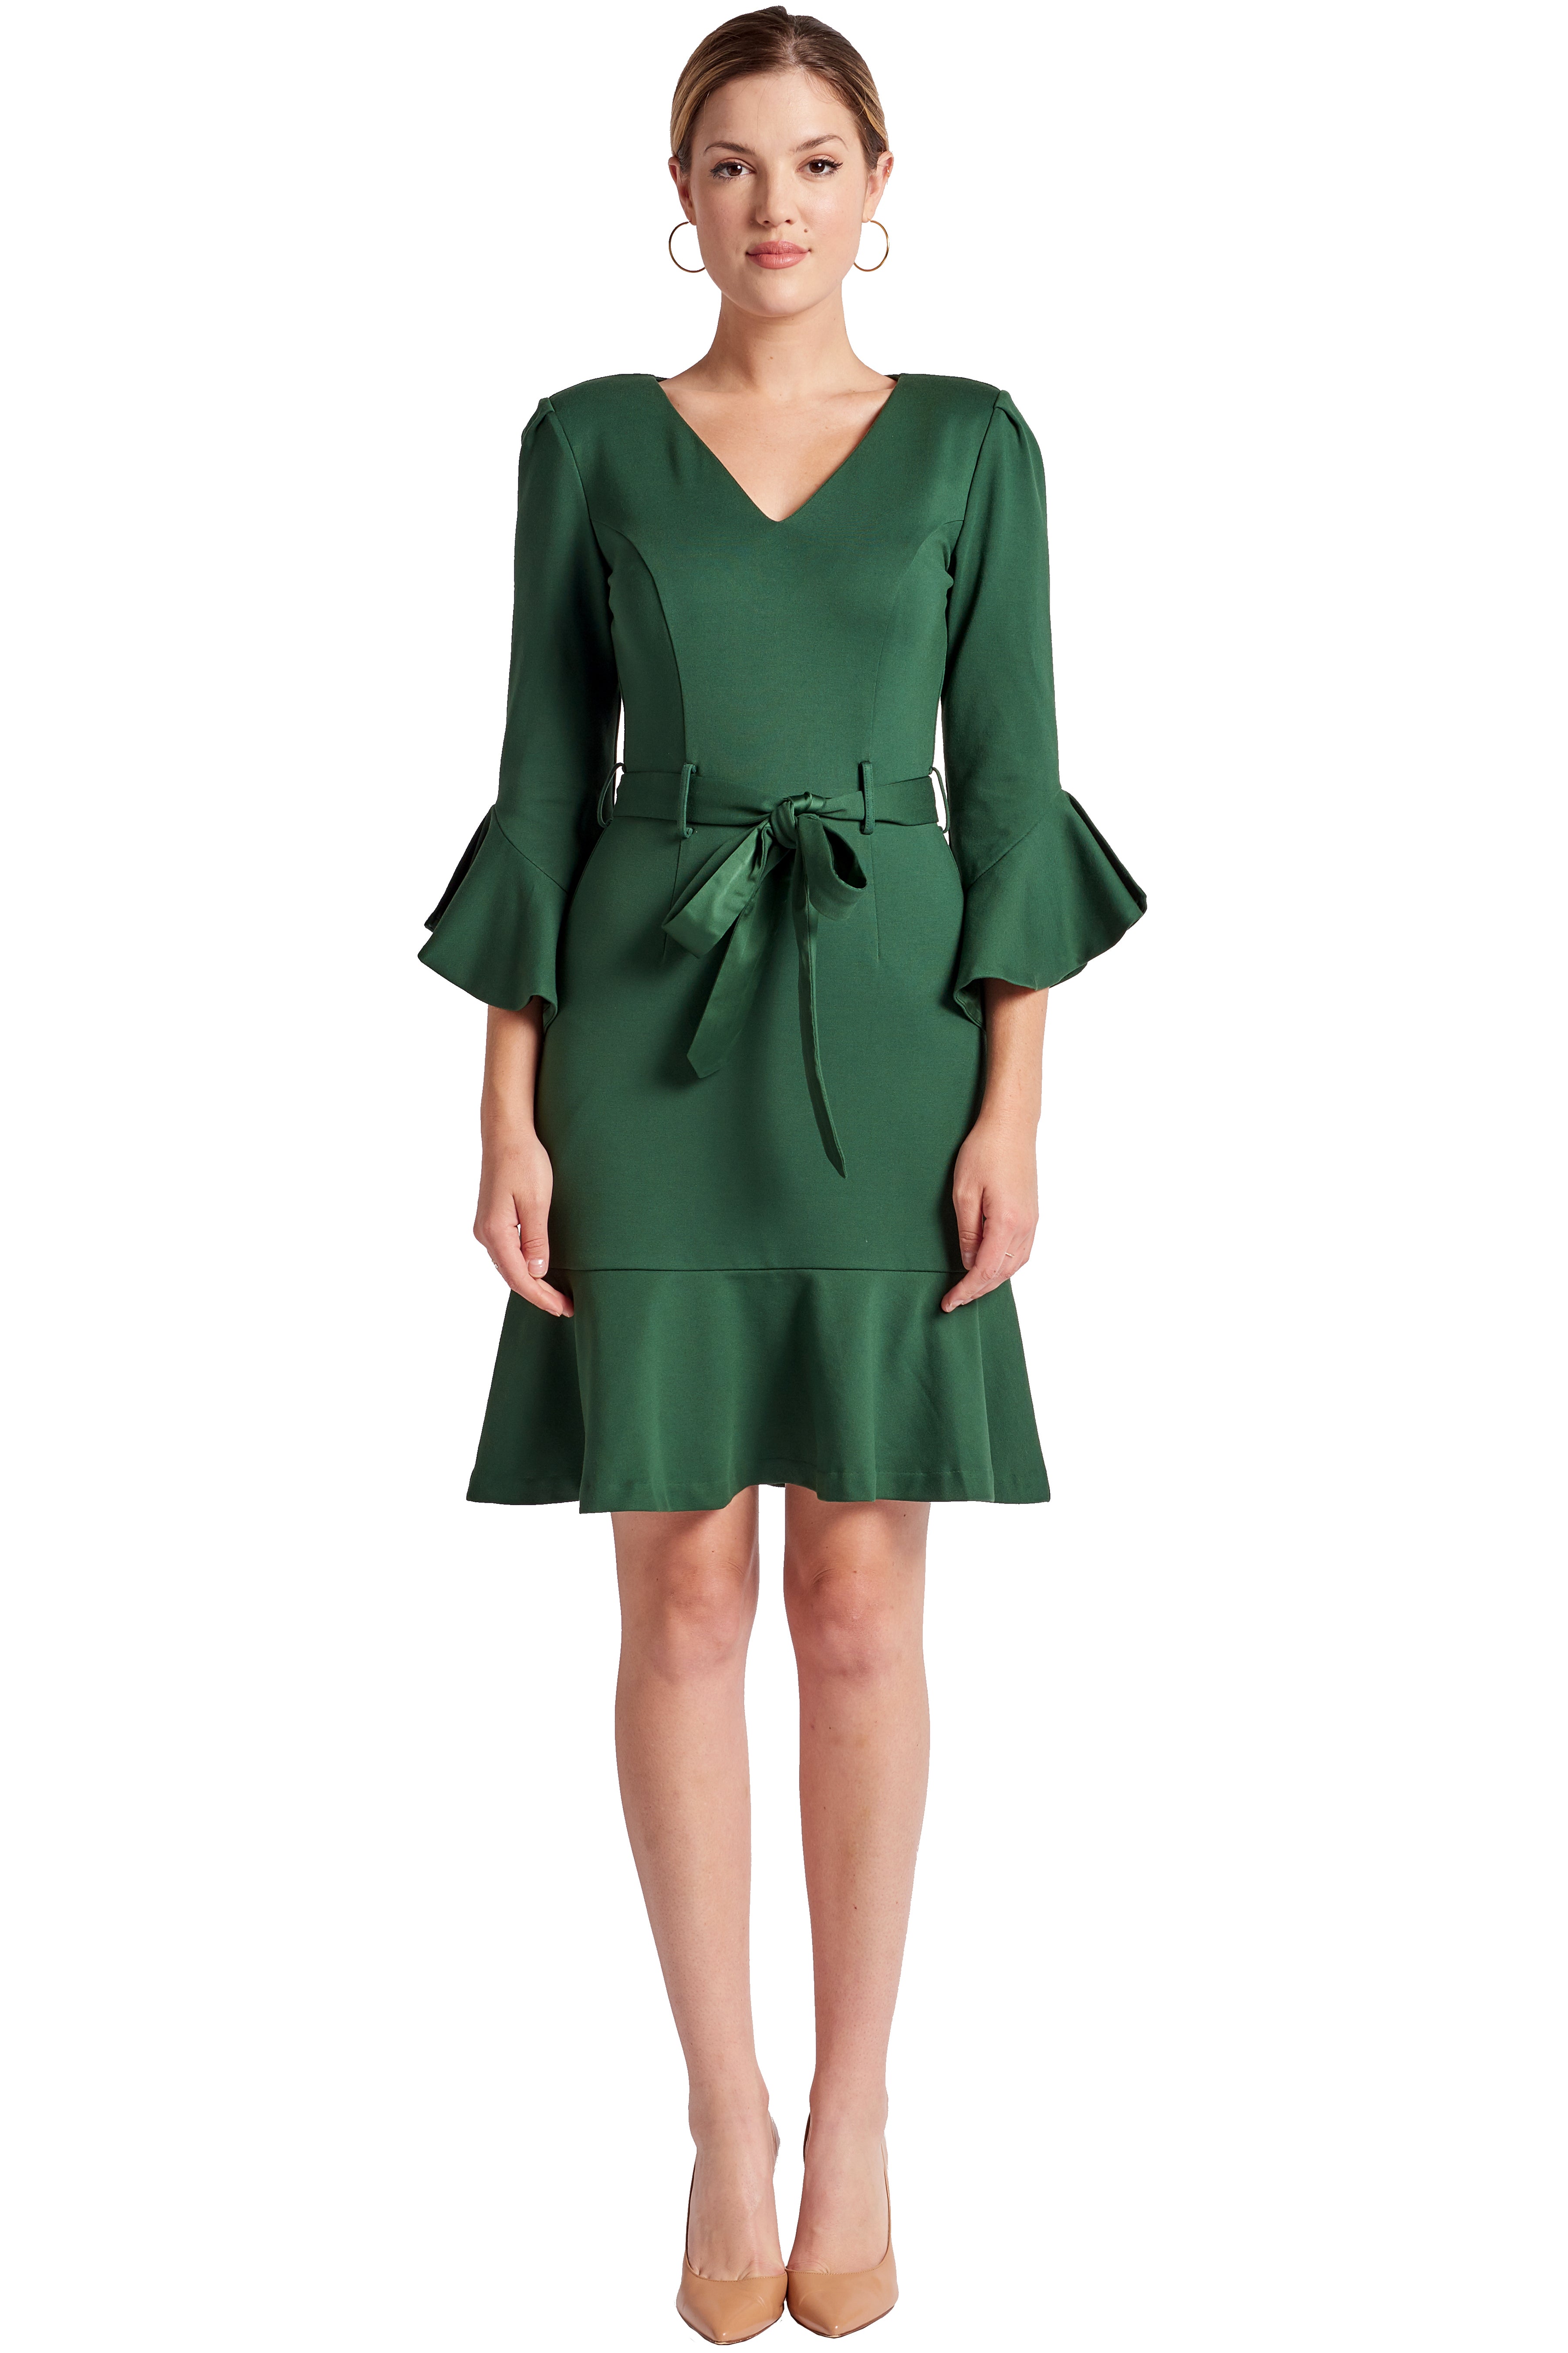 Front view of model wearing the Simona Maghen Tayte Dress in forest green, knee length, v-neck knit Ponte dress with 3/4 bell sleeves, ruffle hem and self belt.